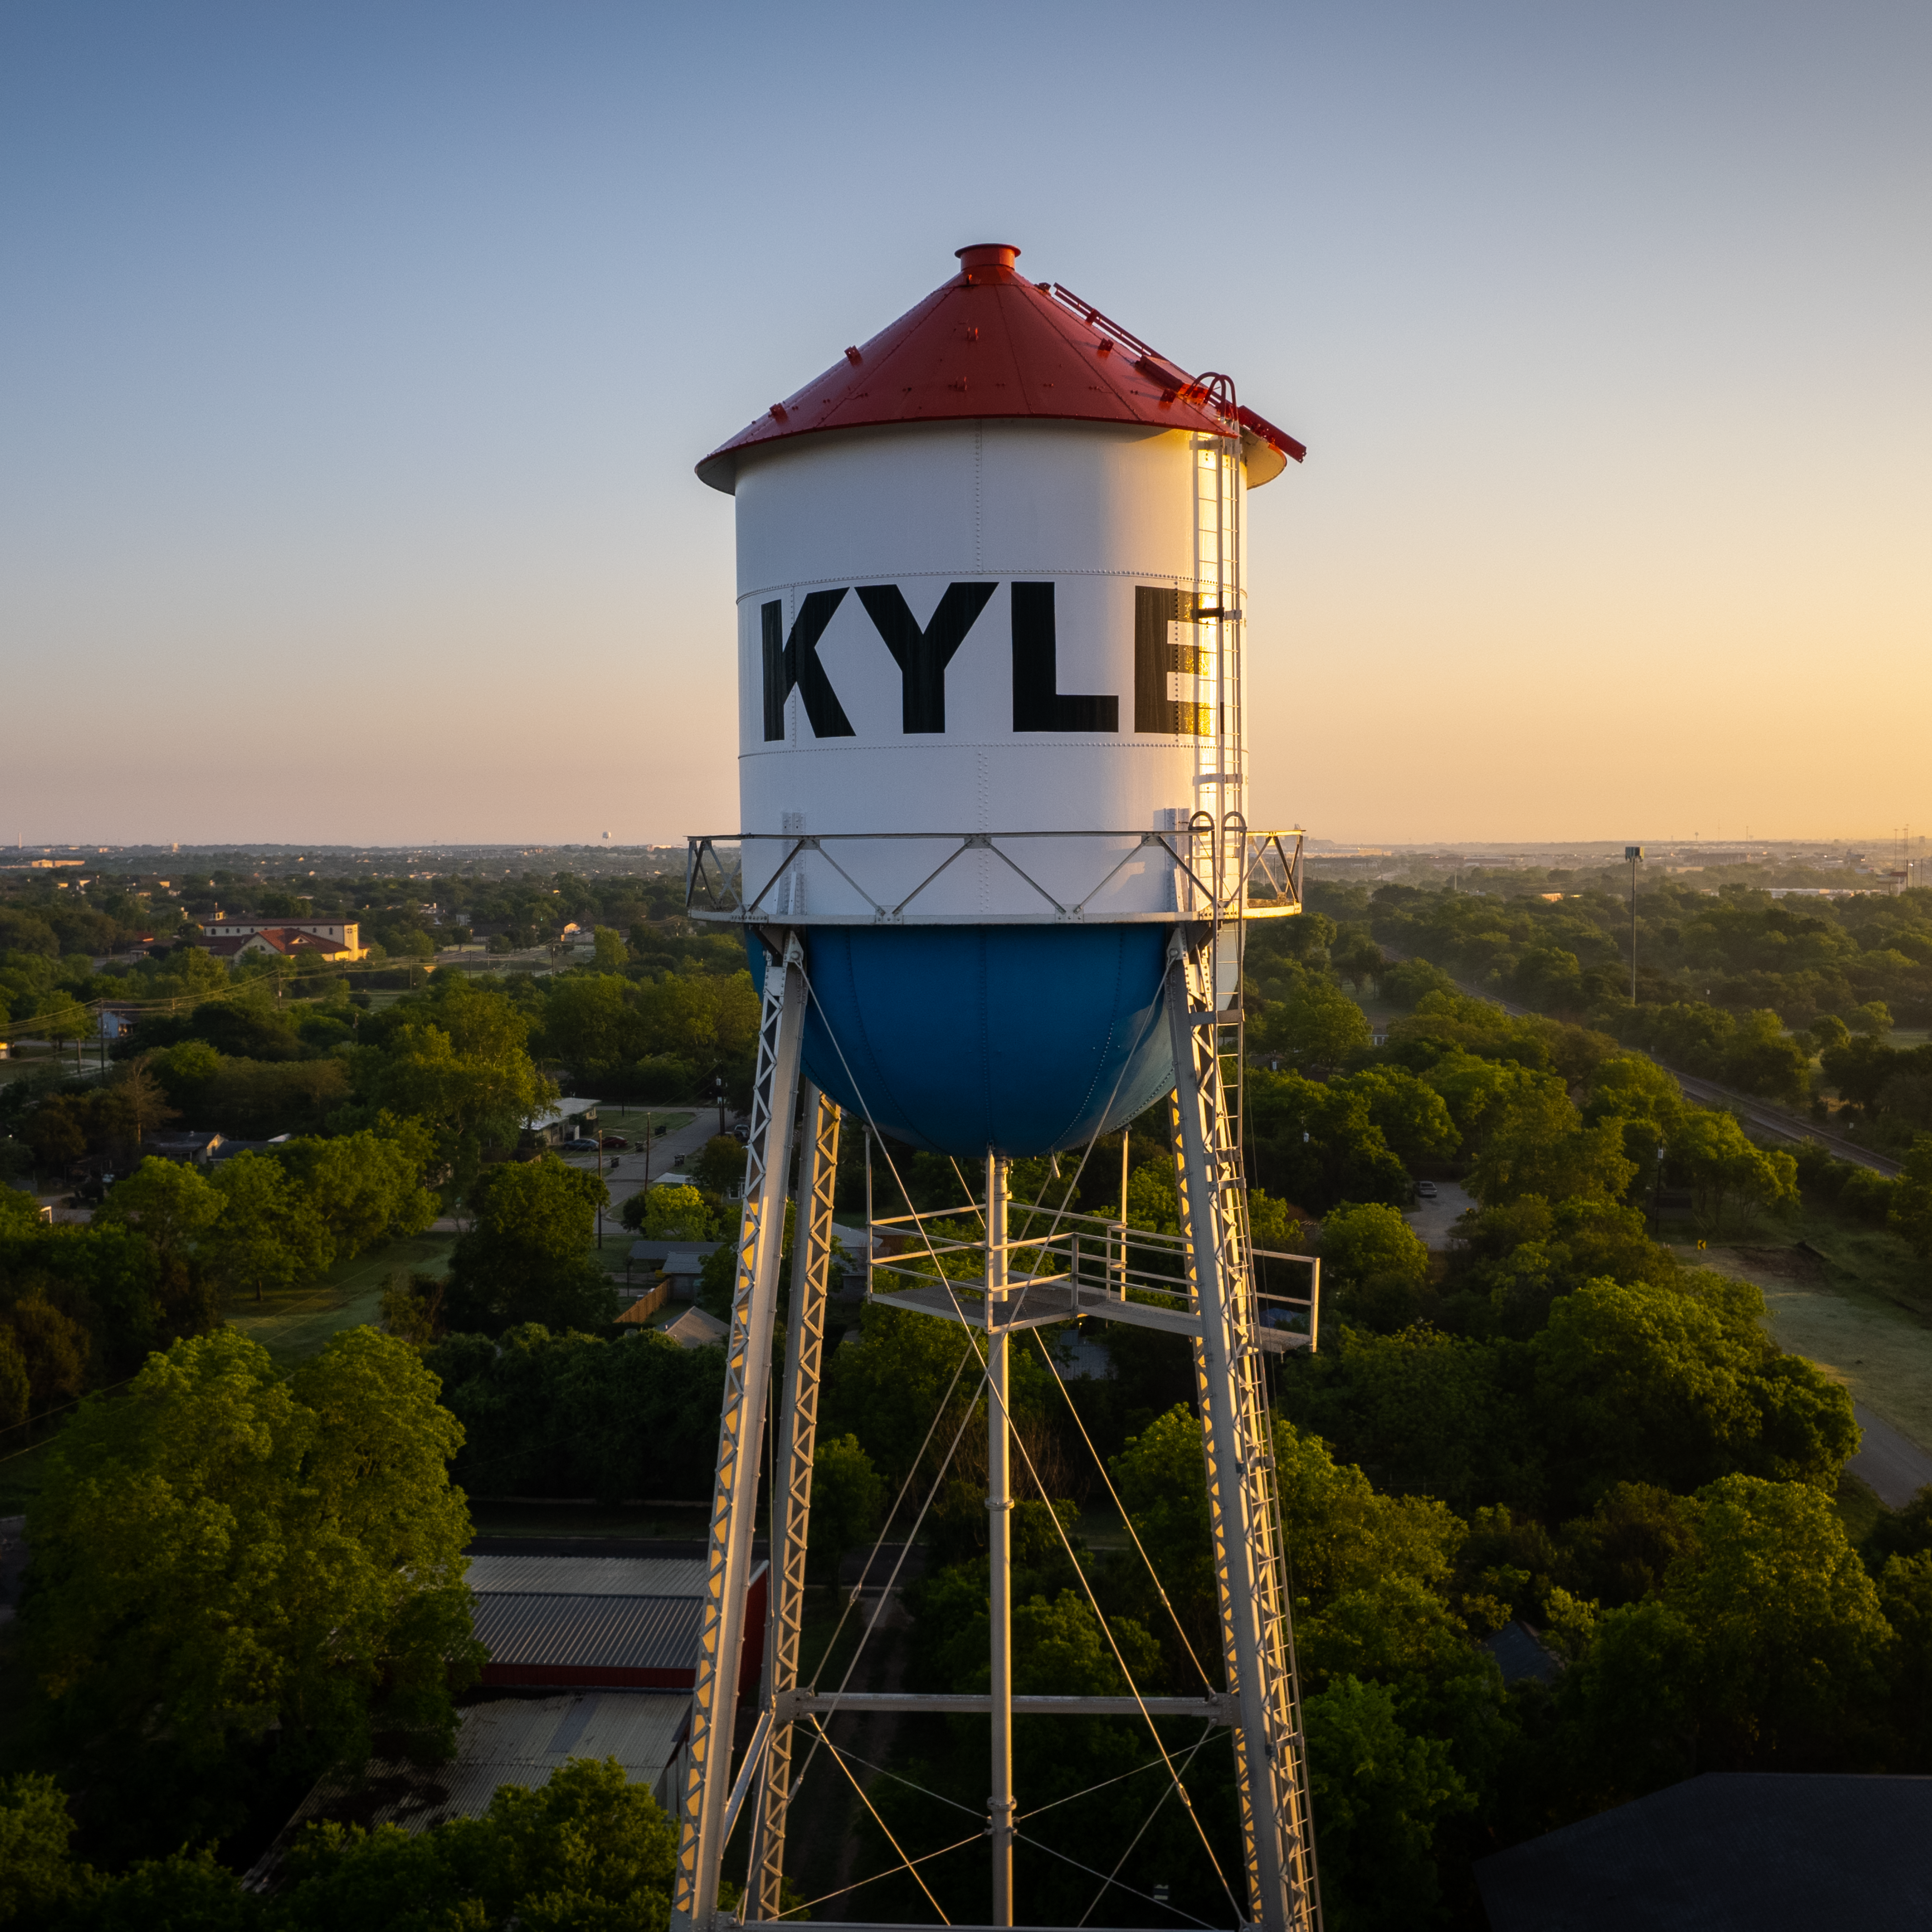 Kyle Water Tower at Sunrise